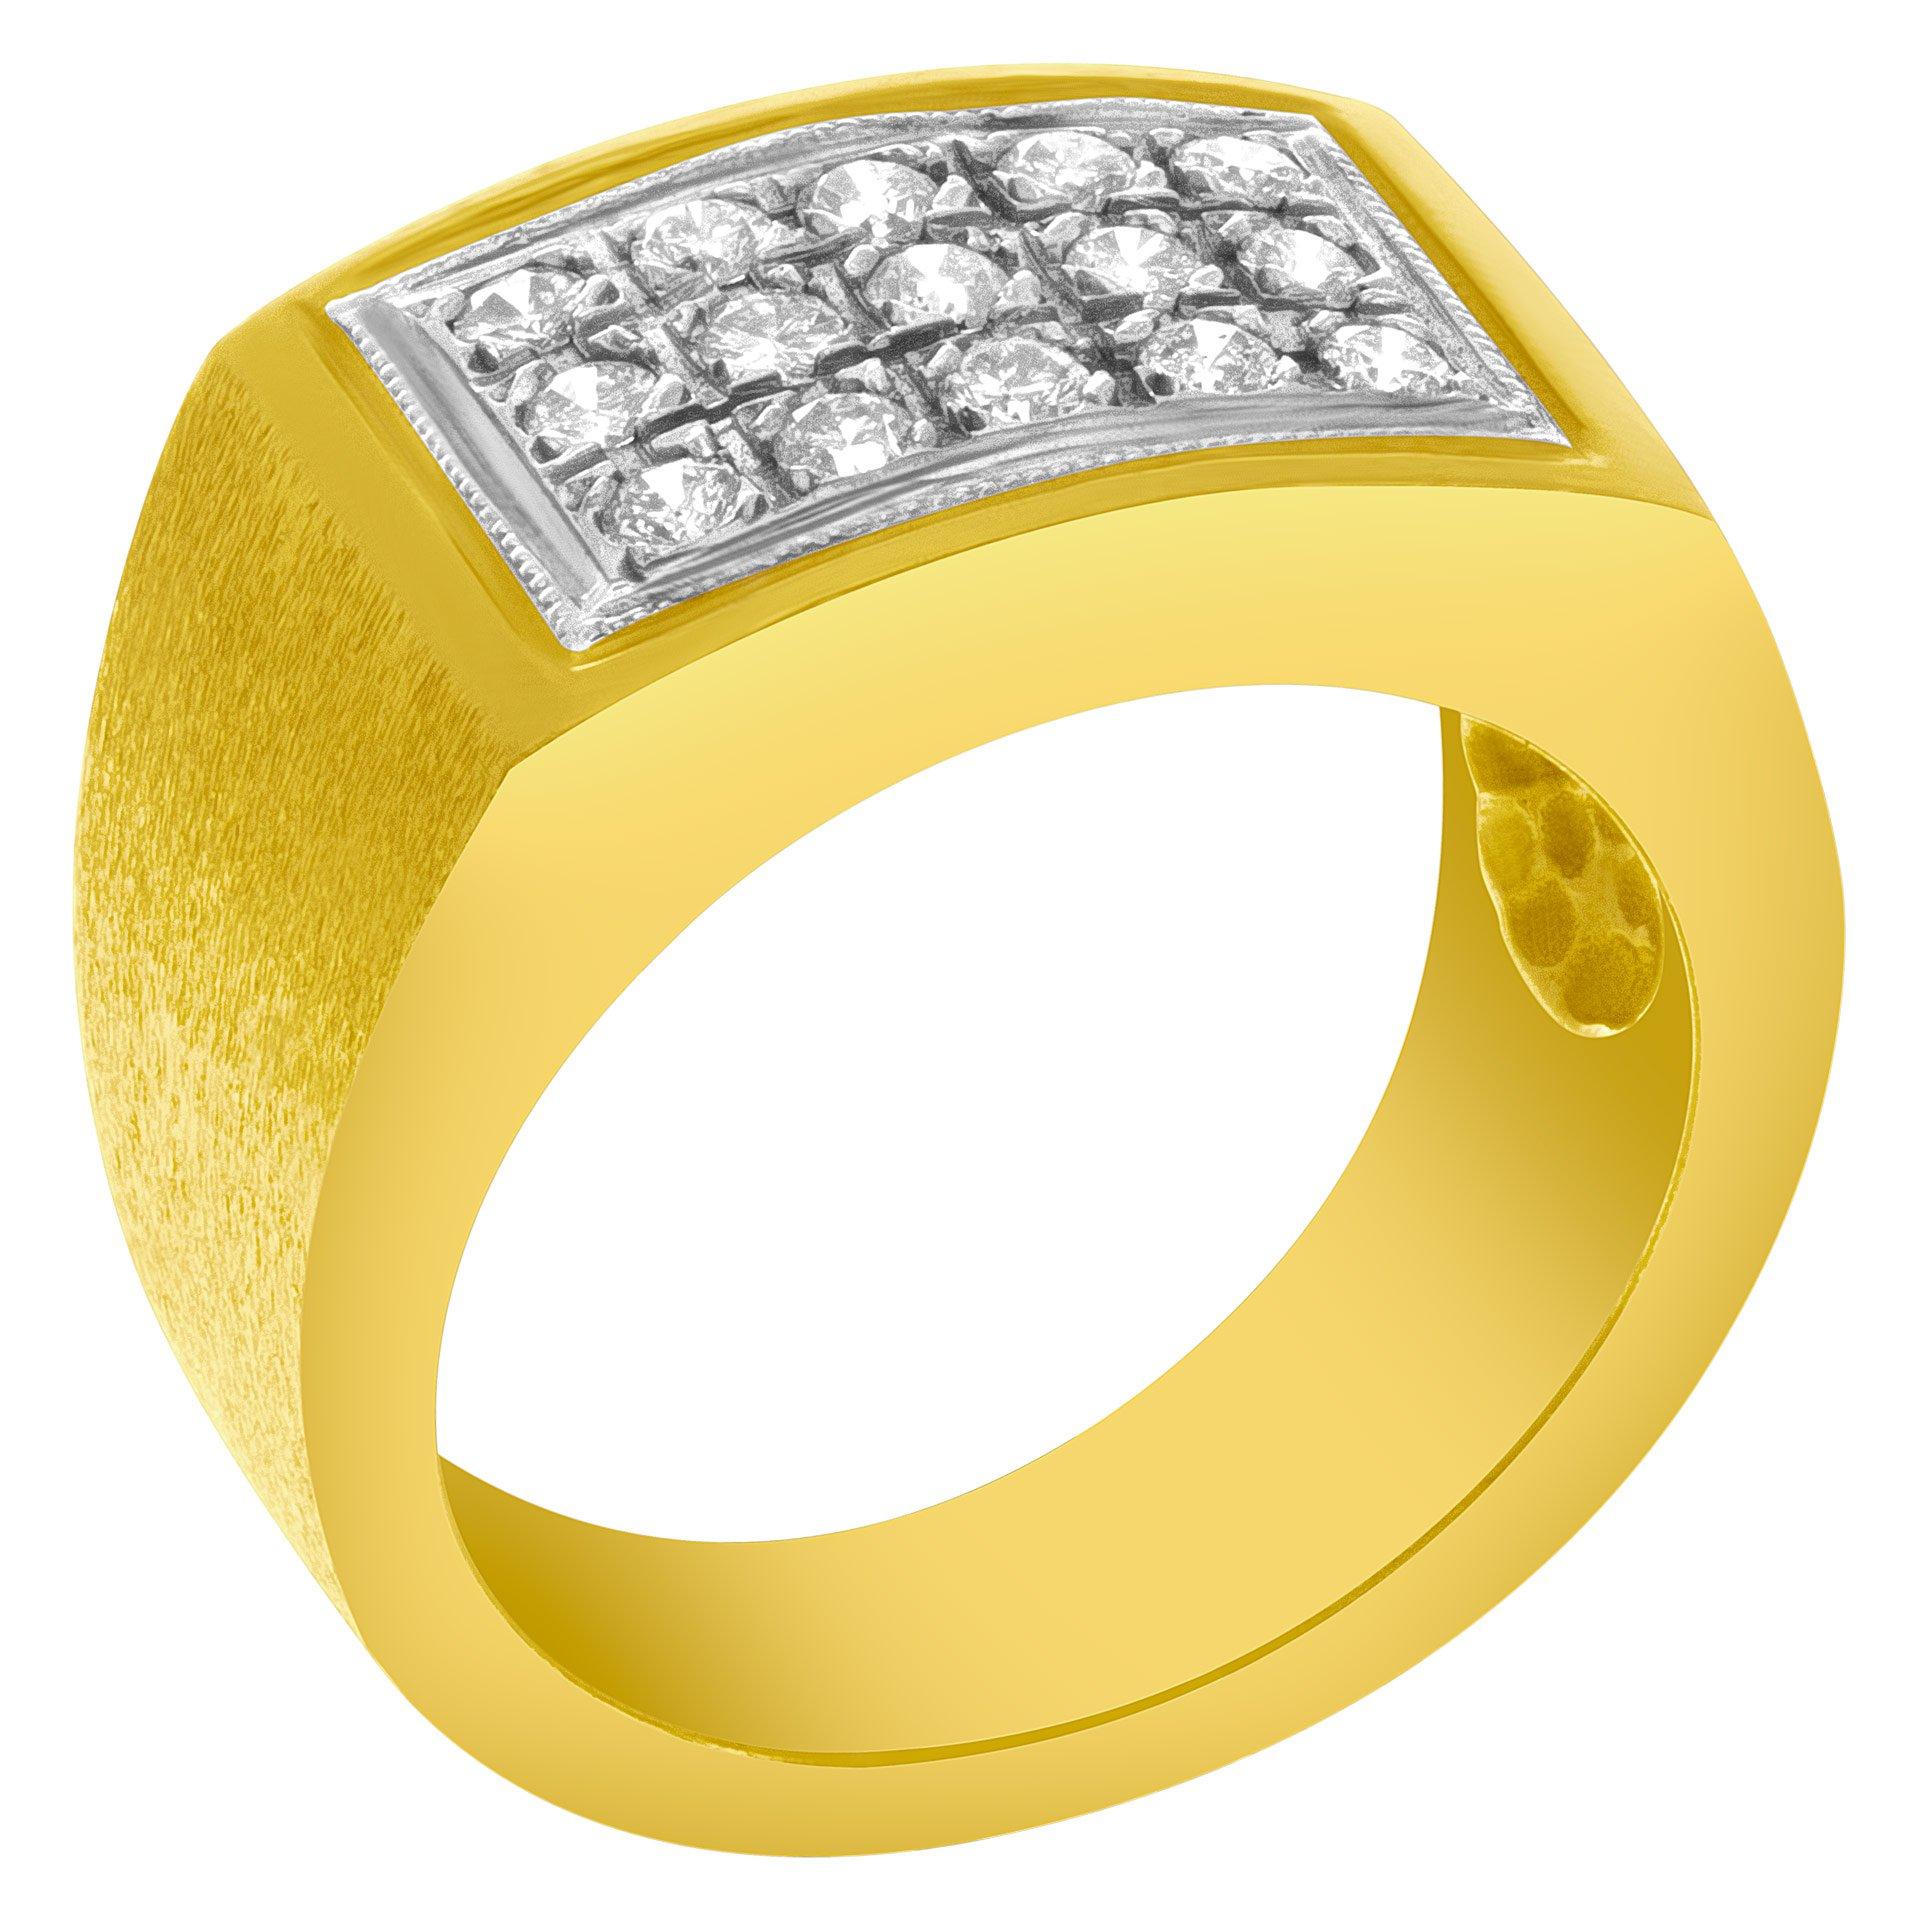 Gents solid diamond ring set in 14k yellow gold with 15 diamonds approx 0.70 carat . Size 8. Width at head: 11.4mmx18.0mm, width at shank: 6.0mm.

This Diamond ring is currently size 8 and some items can be sized up or down, please ask! It weighs